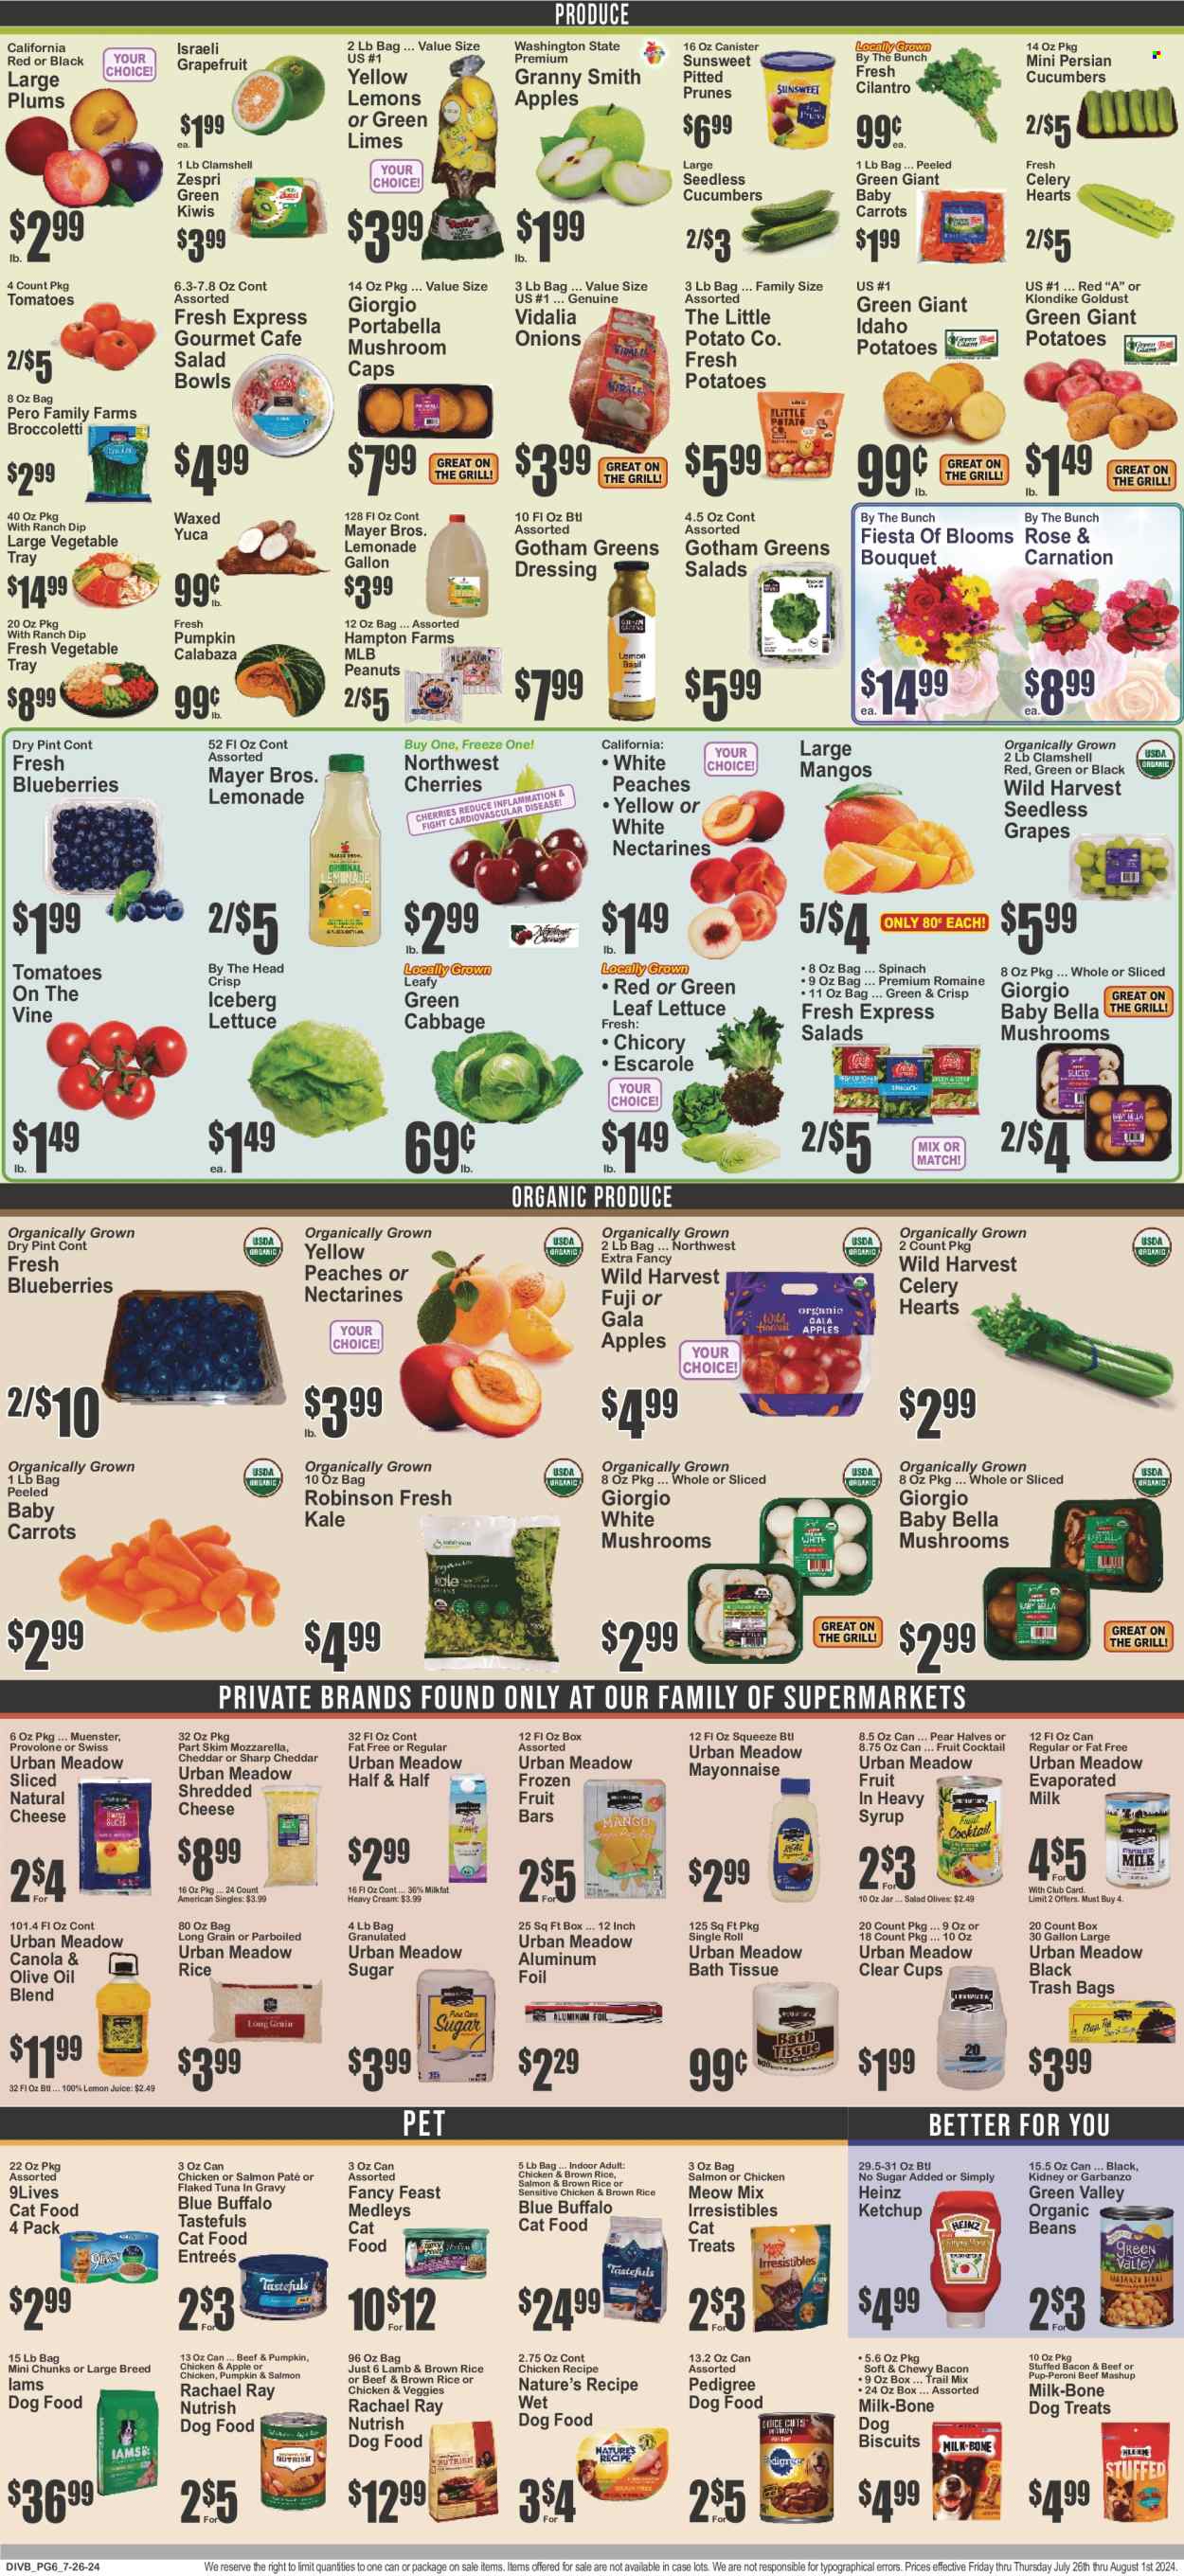 thumbnail - Food Universe Flyer - 07/26/2024 - 08/01/2024 - Sales products - portobello mushrooms, baby bella mushrooms, cabbage, carrots, cucumber, salad greens, tomatoes, kale, potatoes, onion, mixed vegetables, Wild Harvest, sleeved celery, sliced vegetables, diced vegetables, Gala, grapefruits, grapes, kiwi, limes, nectarines, seedless grapes, plums, pears, Granny Smith, mozzarella, shredded cheese, sliced cheese, cheddar, cheese, Münster cheese, Provolone, snack bar, evaporated milk, heavy cream, mayonnaise, ice cream bars, fruit bar, frozen fruit, bars, Heinz, garbanzo beans, cilantro, ketchup, syrup, prunes, peanuts, dried fruit, trail mix, lemonade, lemon juice, Half and half, bath tissue, trash bags, canister, salad bowl, aluminium foil, animal food, animal treats, Blue Buffalo, cat food, dog food, wet dog food, dog biscuits, Pedigree, 9lives, Pup-Peroni, Meow Mix, Fancy Feast, Iams, Nutrish, dog treat, bouquet, carnation. Page 7.